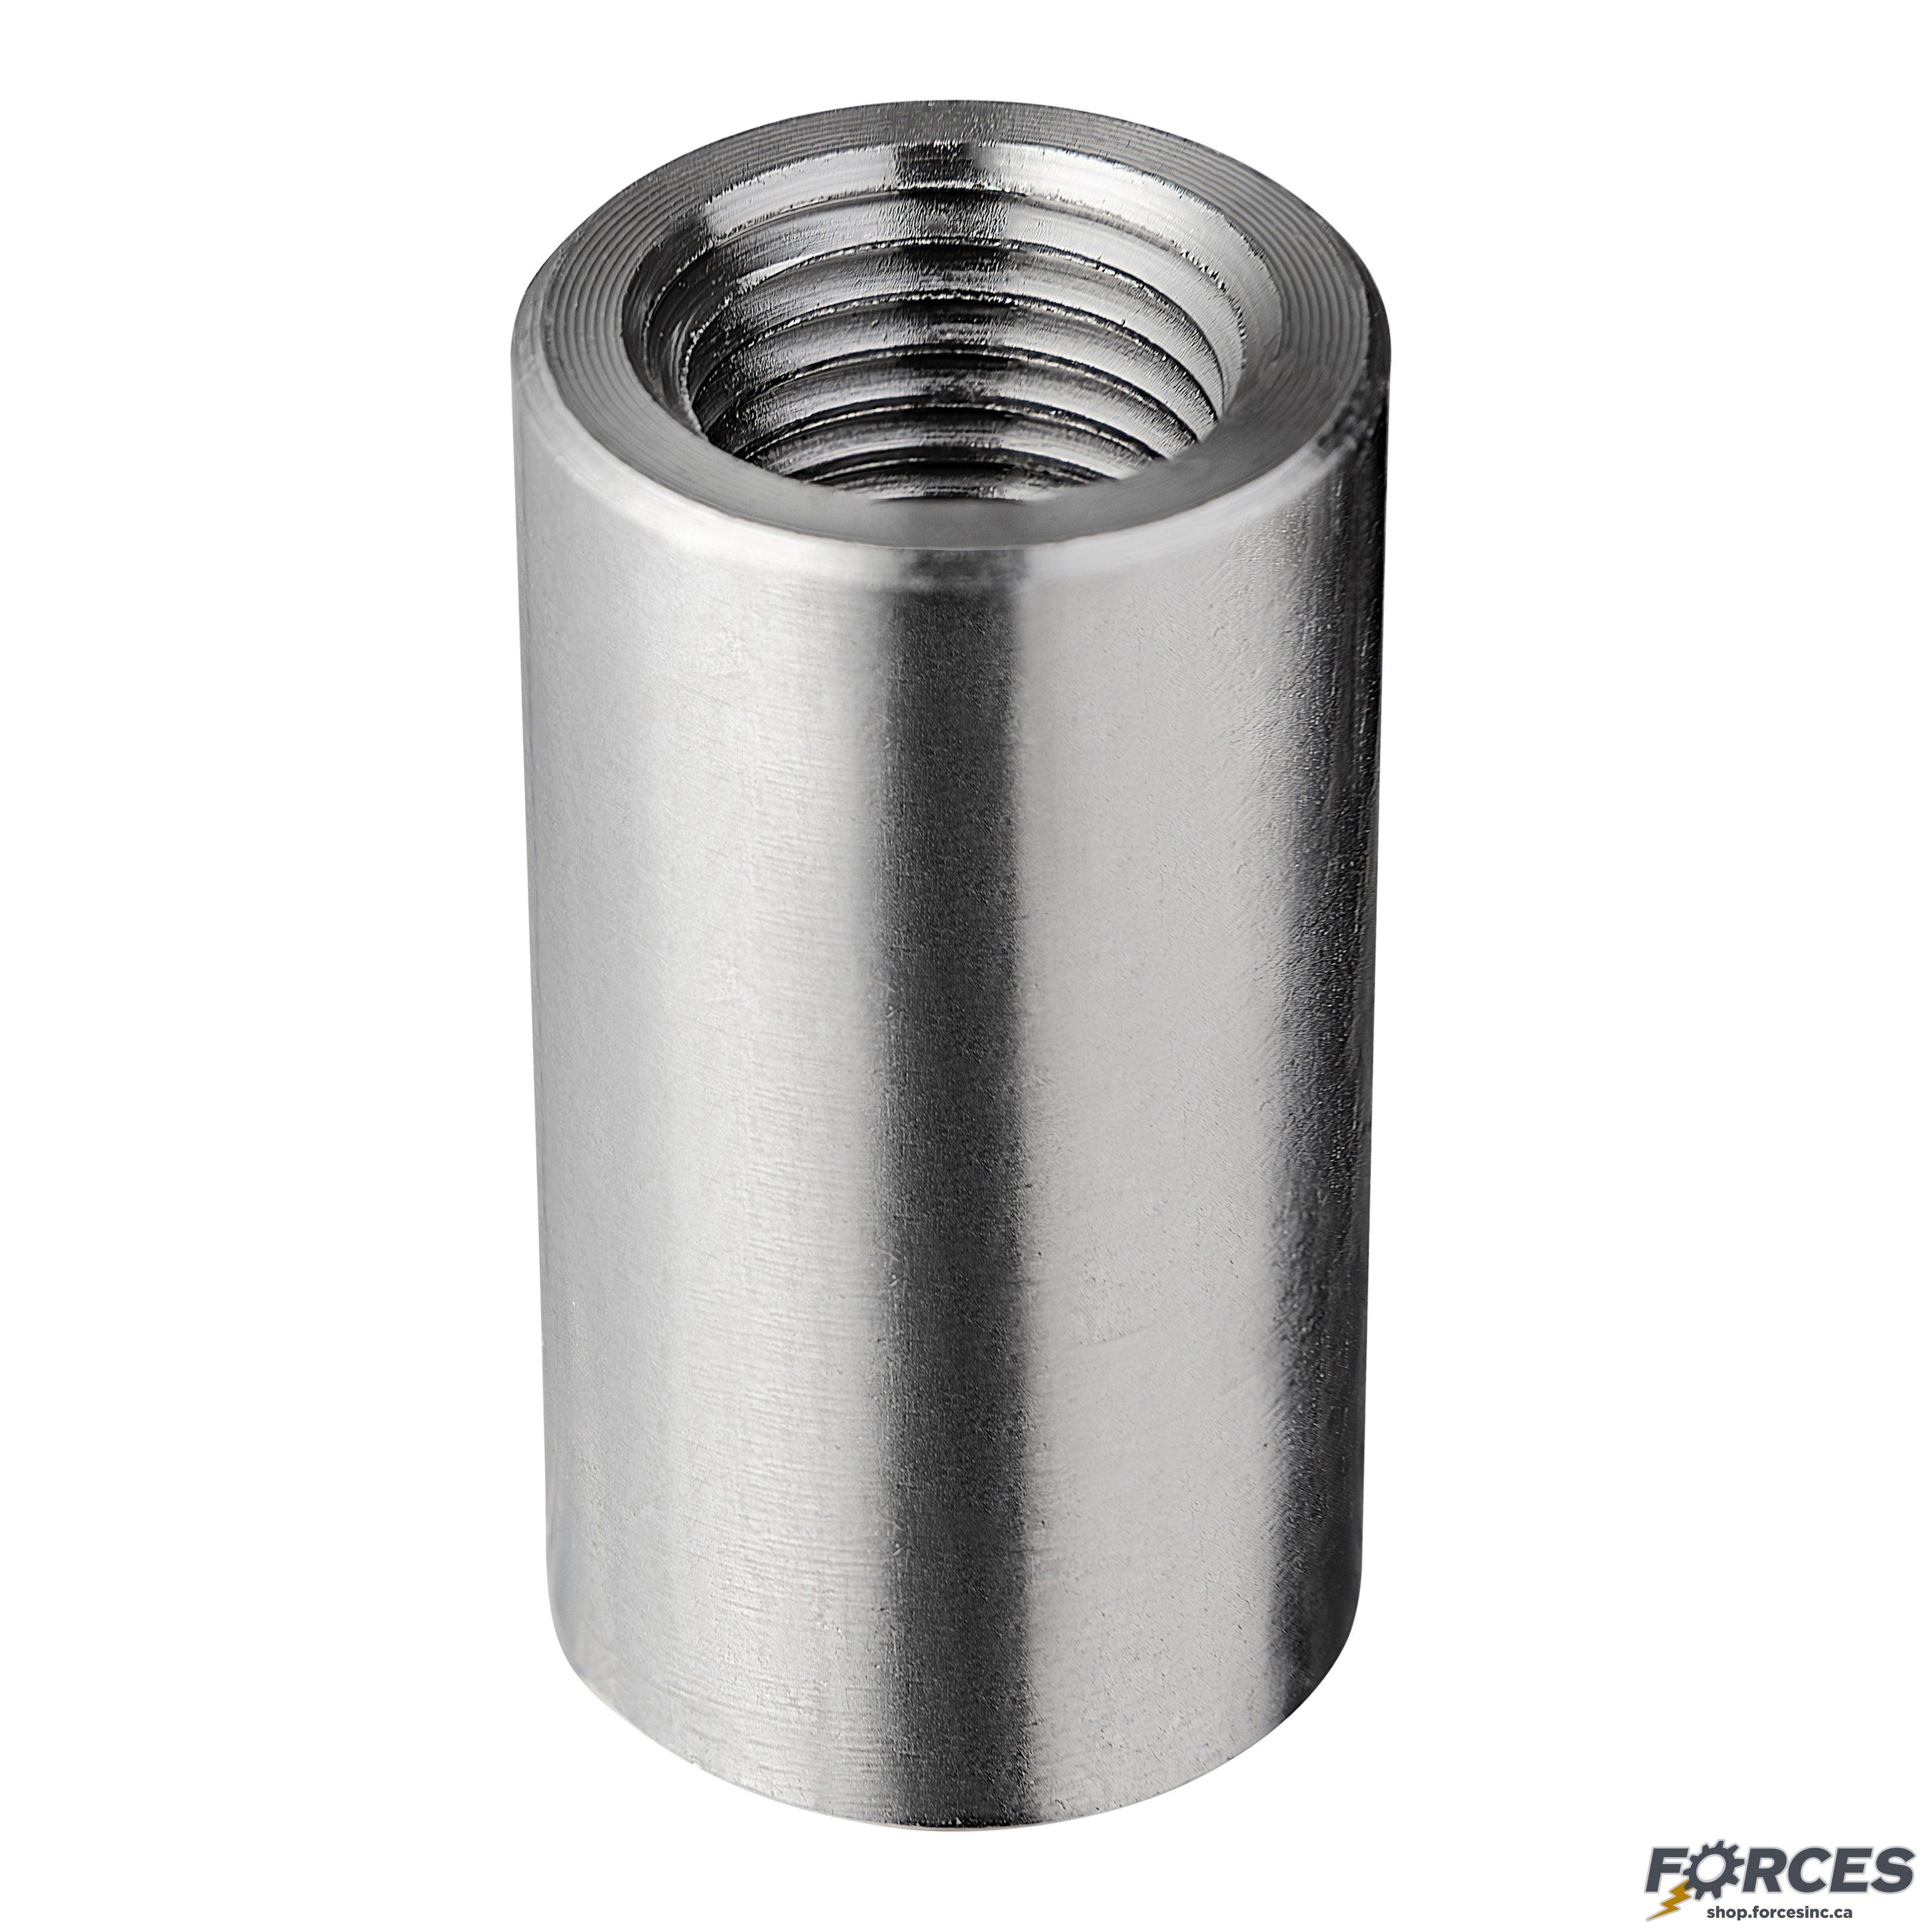 1-1/2" Full Coupling NPT #3000 - Stainless Steel 316 - Forces Inc